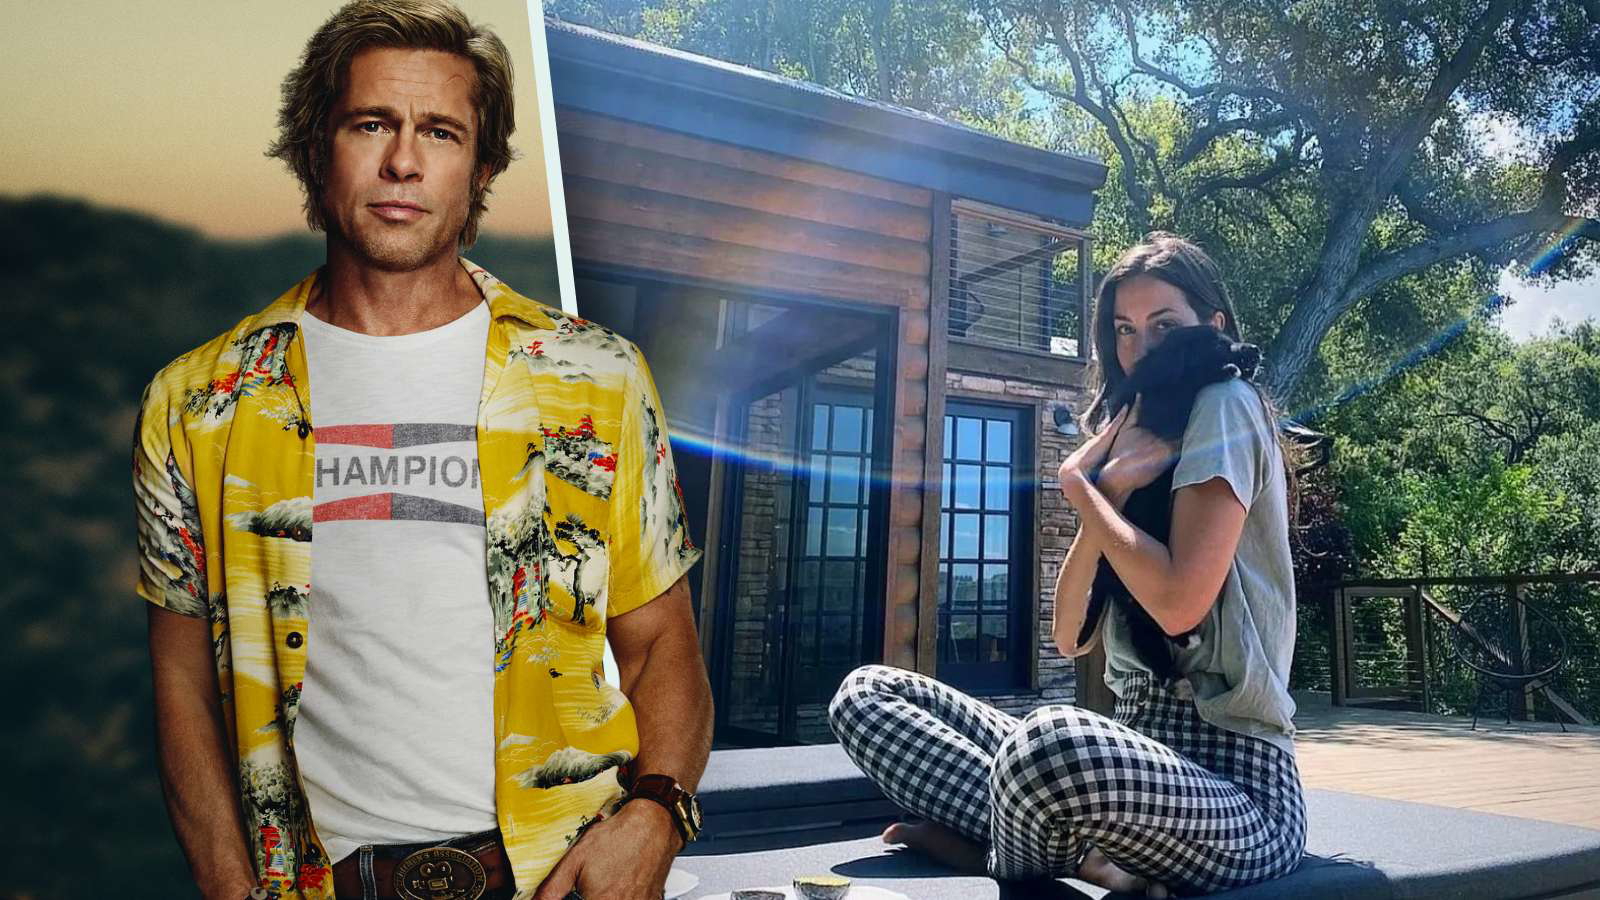 “He is just plain gorgeous, 60 years old?”: Brad Pitt Leaves Everyone Speechless With His Recent Appearance With Girlfriend Ines de Ramon